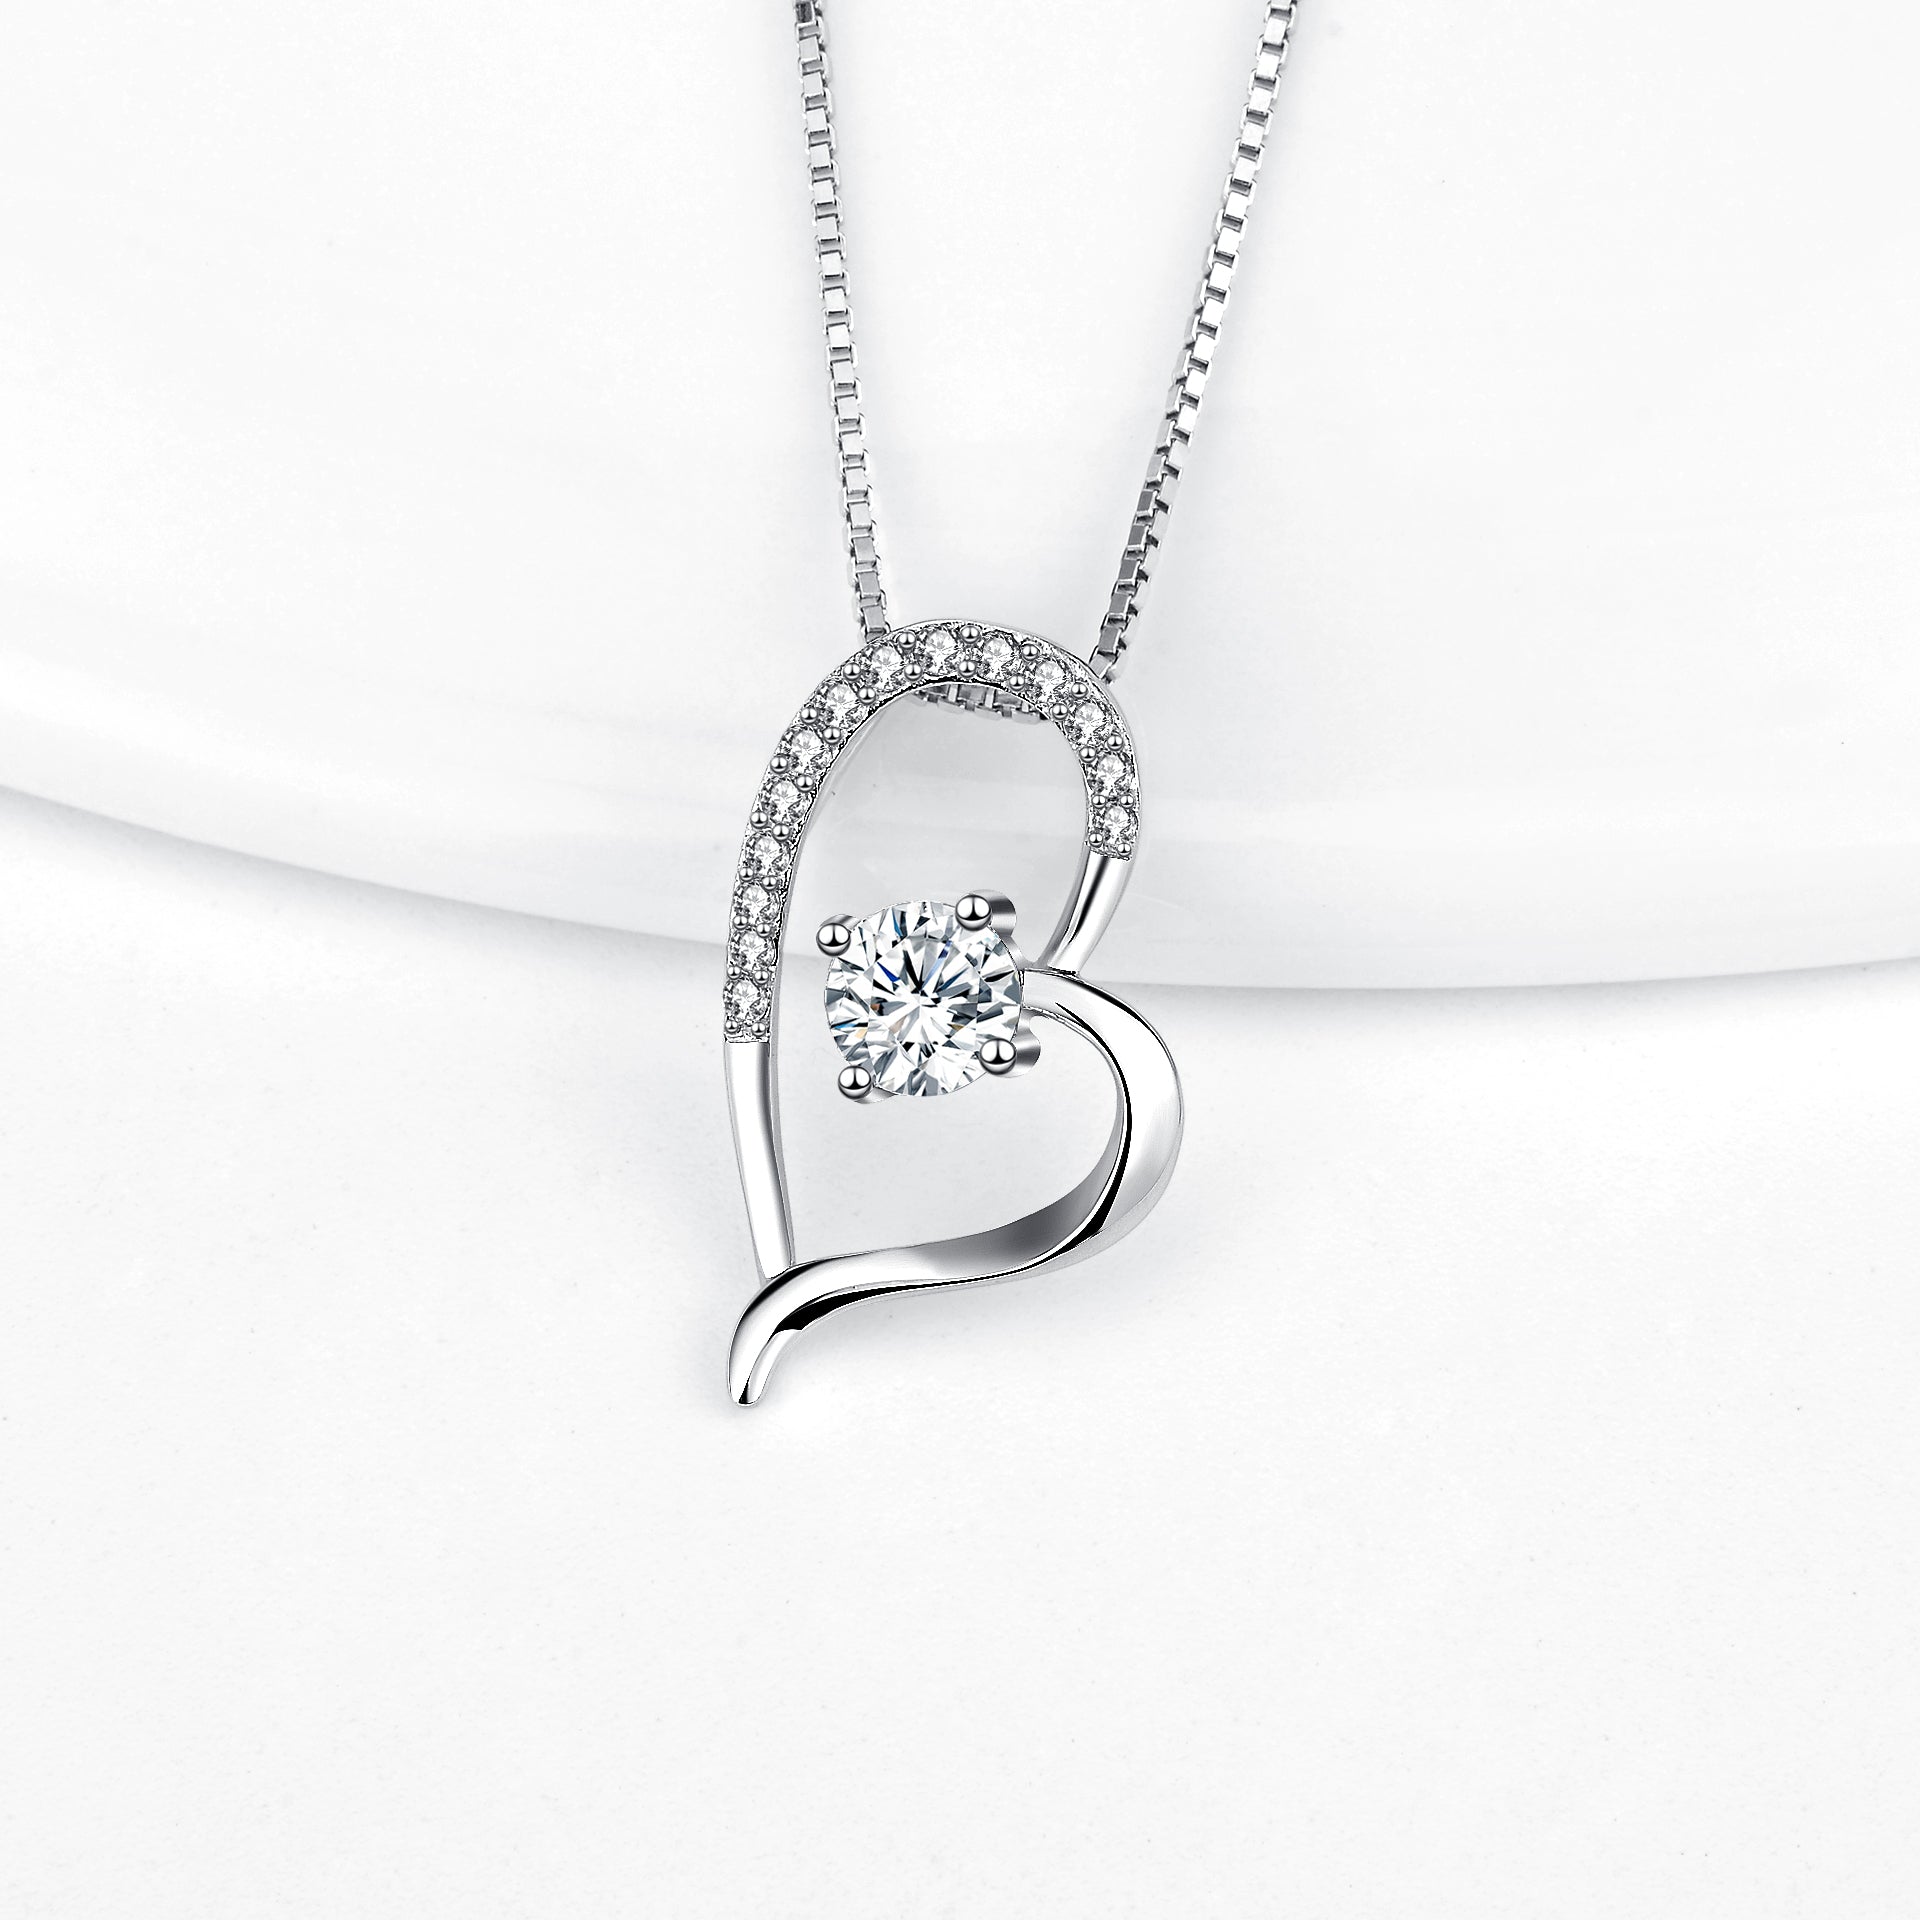 AAA Cubic Zirconia Heart Necklace Fashion Solid 925 Sterling Silver Jewelry Producer,